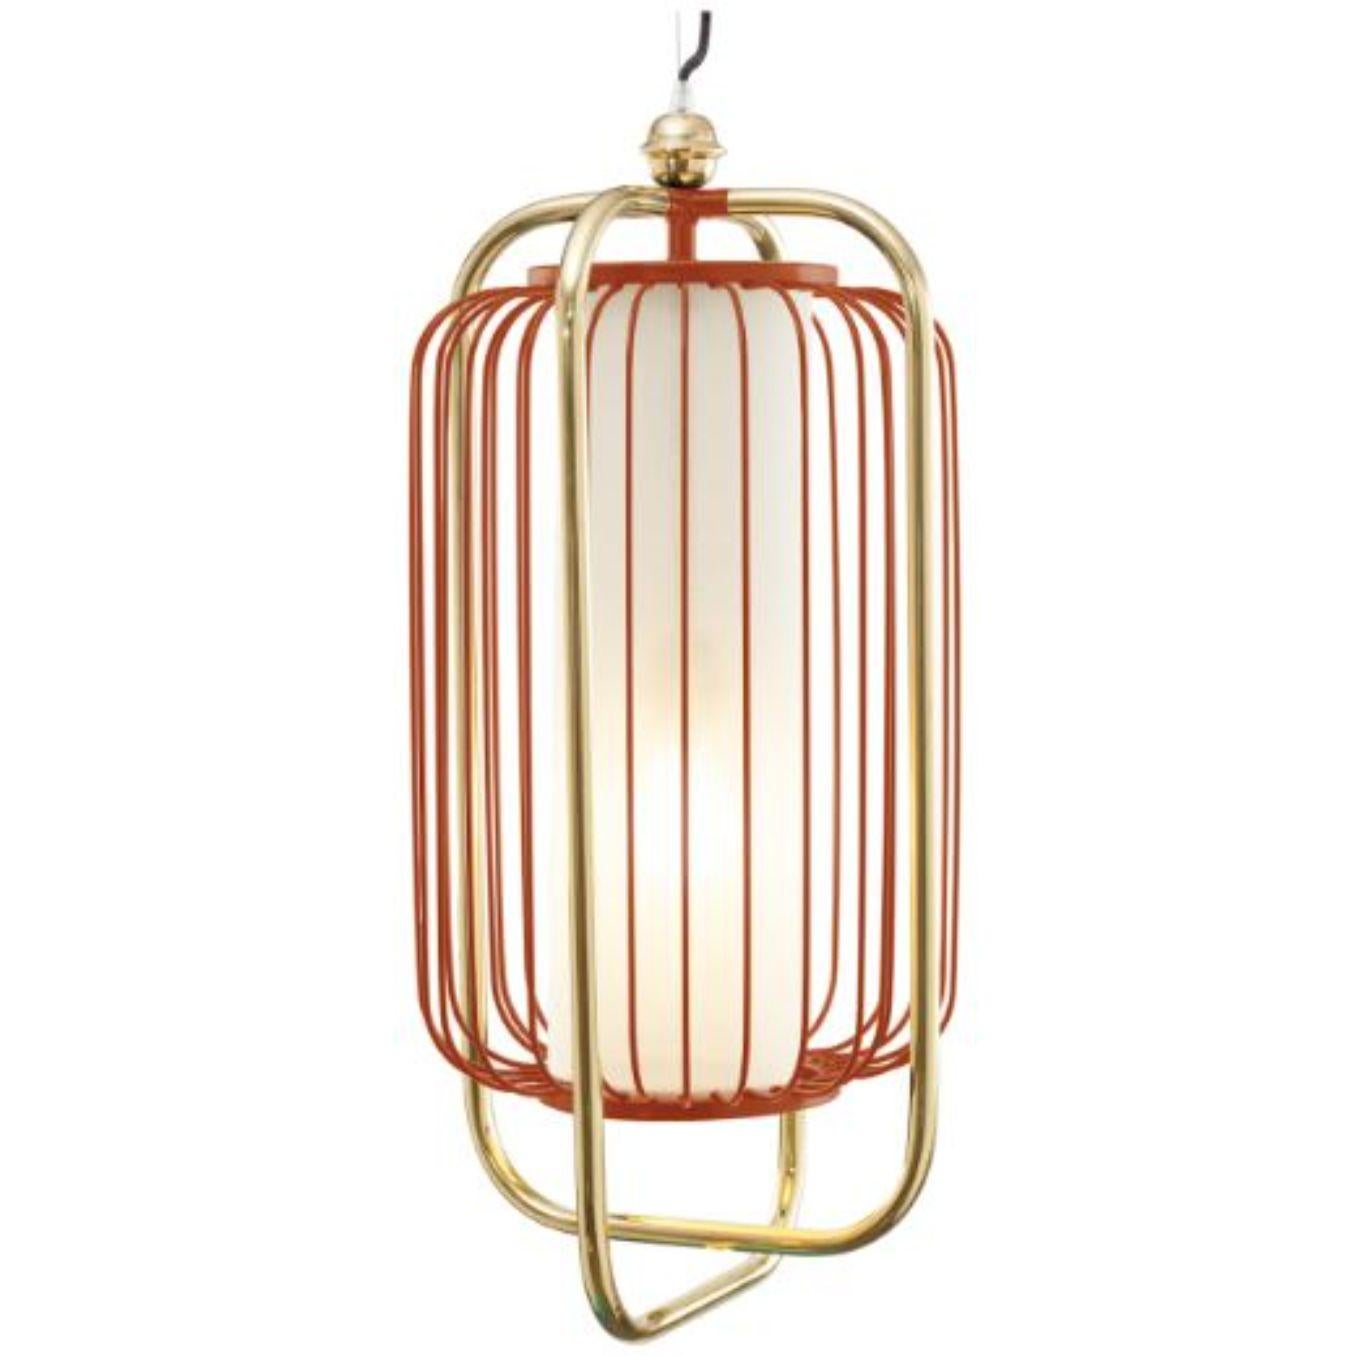 Brass and Copper Jules II suspension lamp by Dooq
Dimensions: W 30 x D 30 x H 64 cm
Materials: lacquered metal, polished or brushed metal, brass.
abat-jour: cotton
Also available in different colours and materials.

Information:
230V/50Hz
E27/1x20W